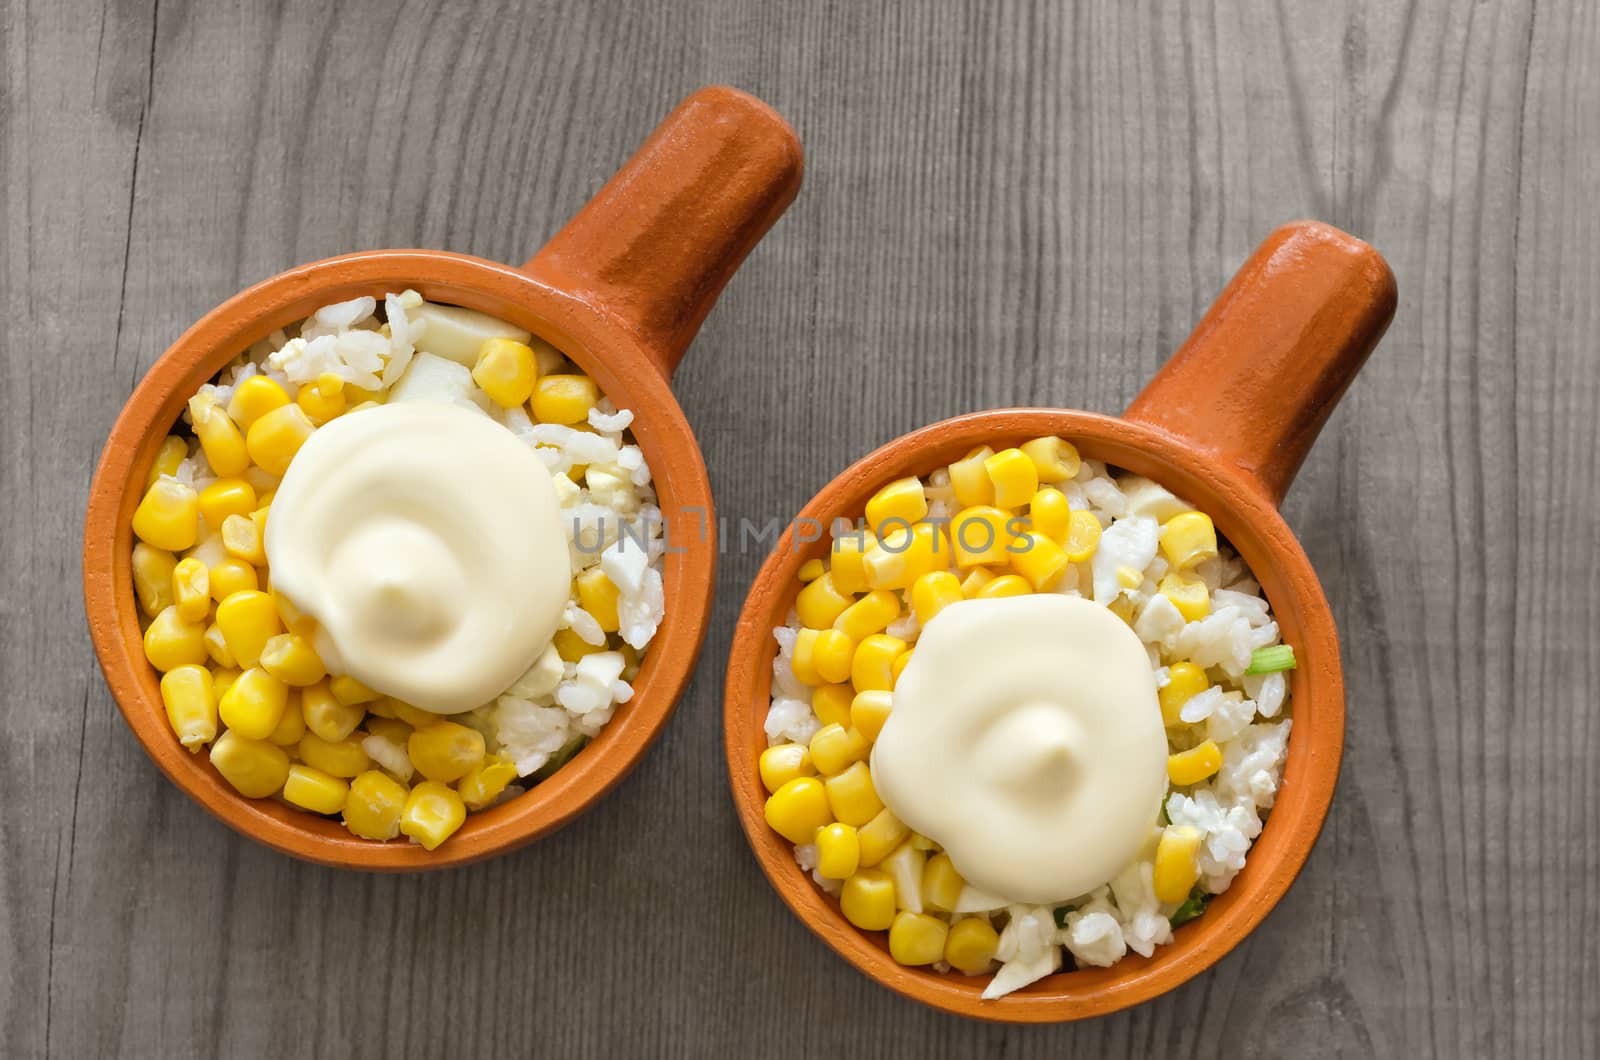 Rice salad and canned corn with mayonnaise, on a gray wooden background.